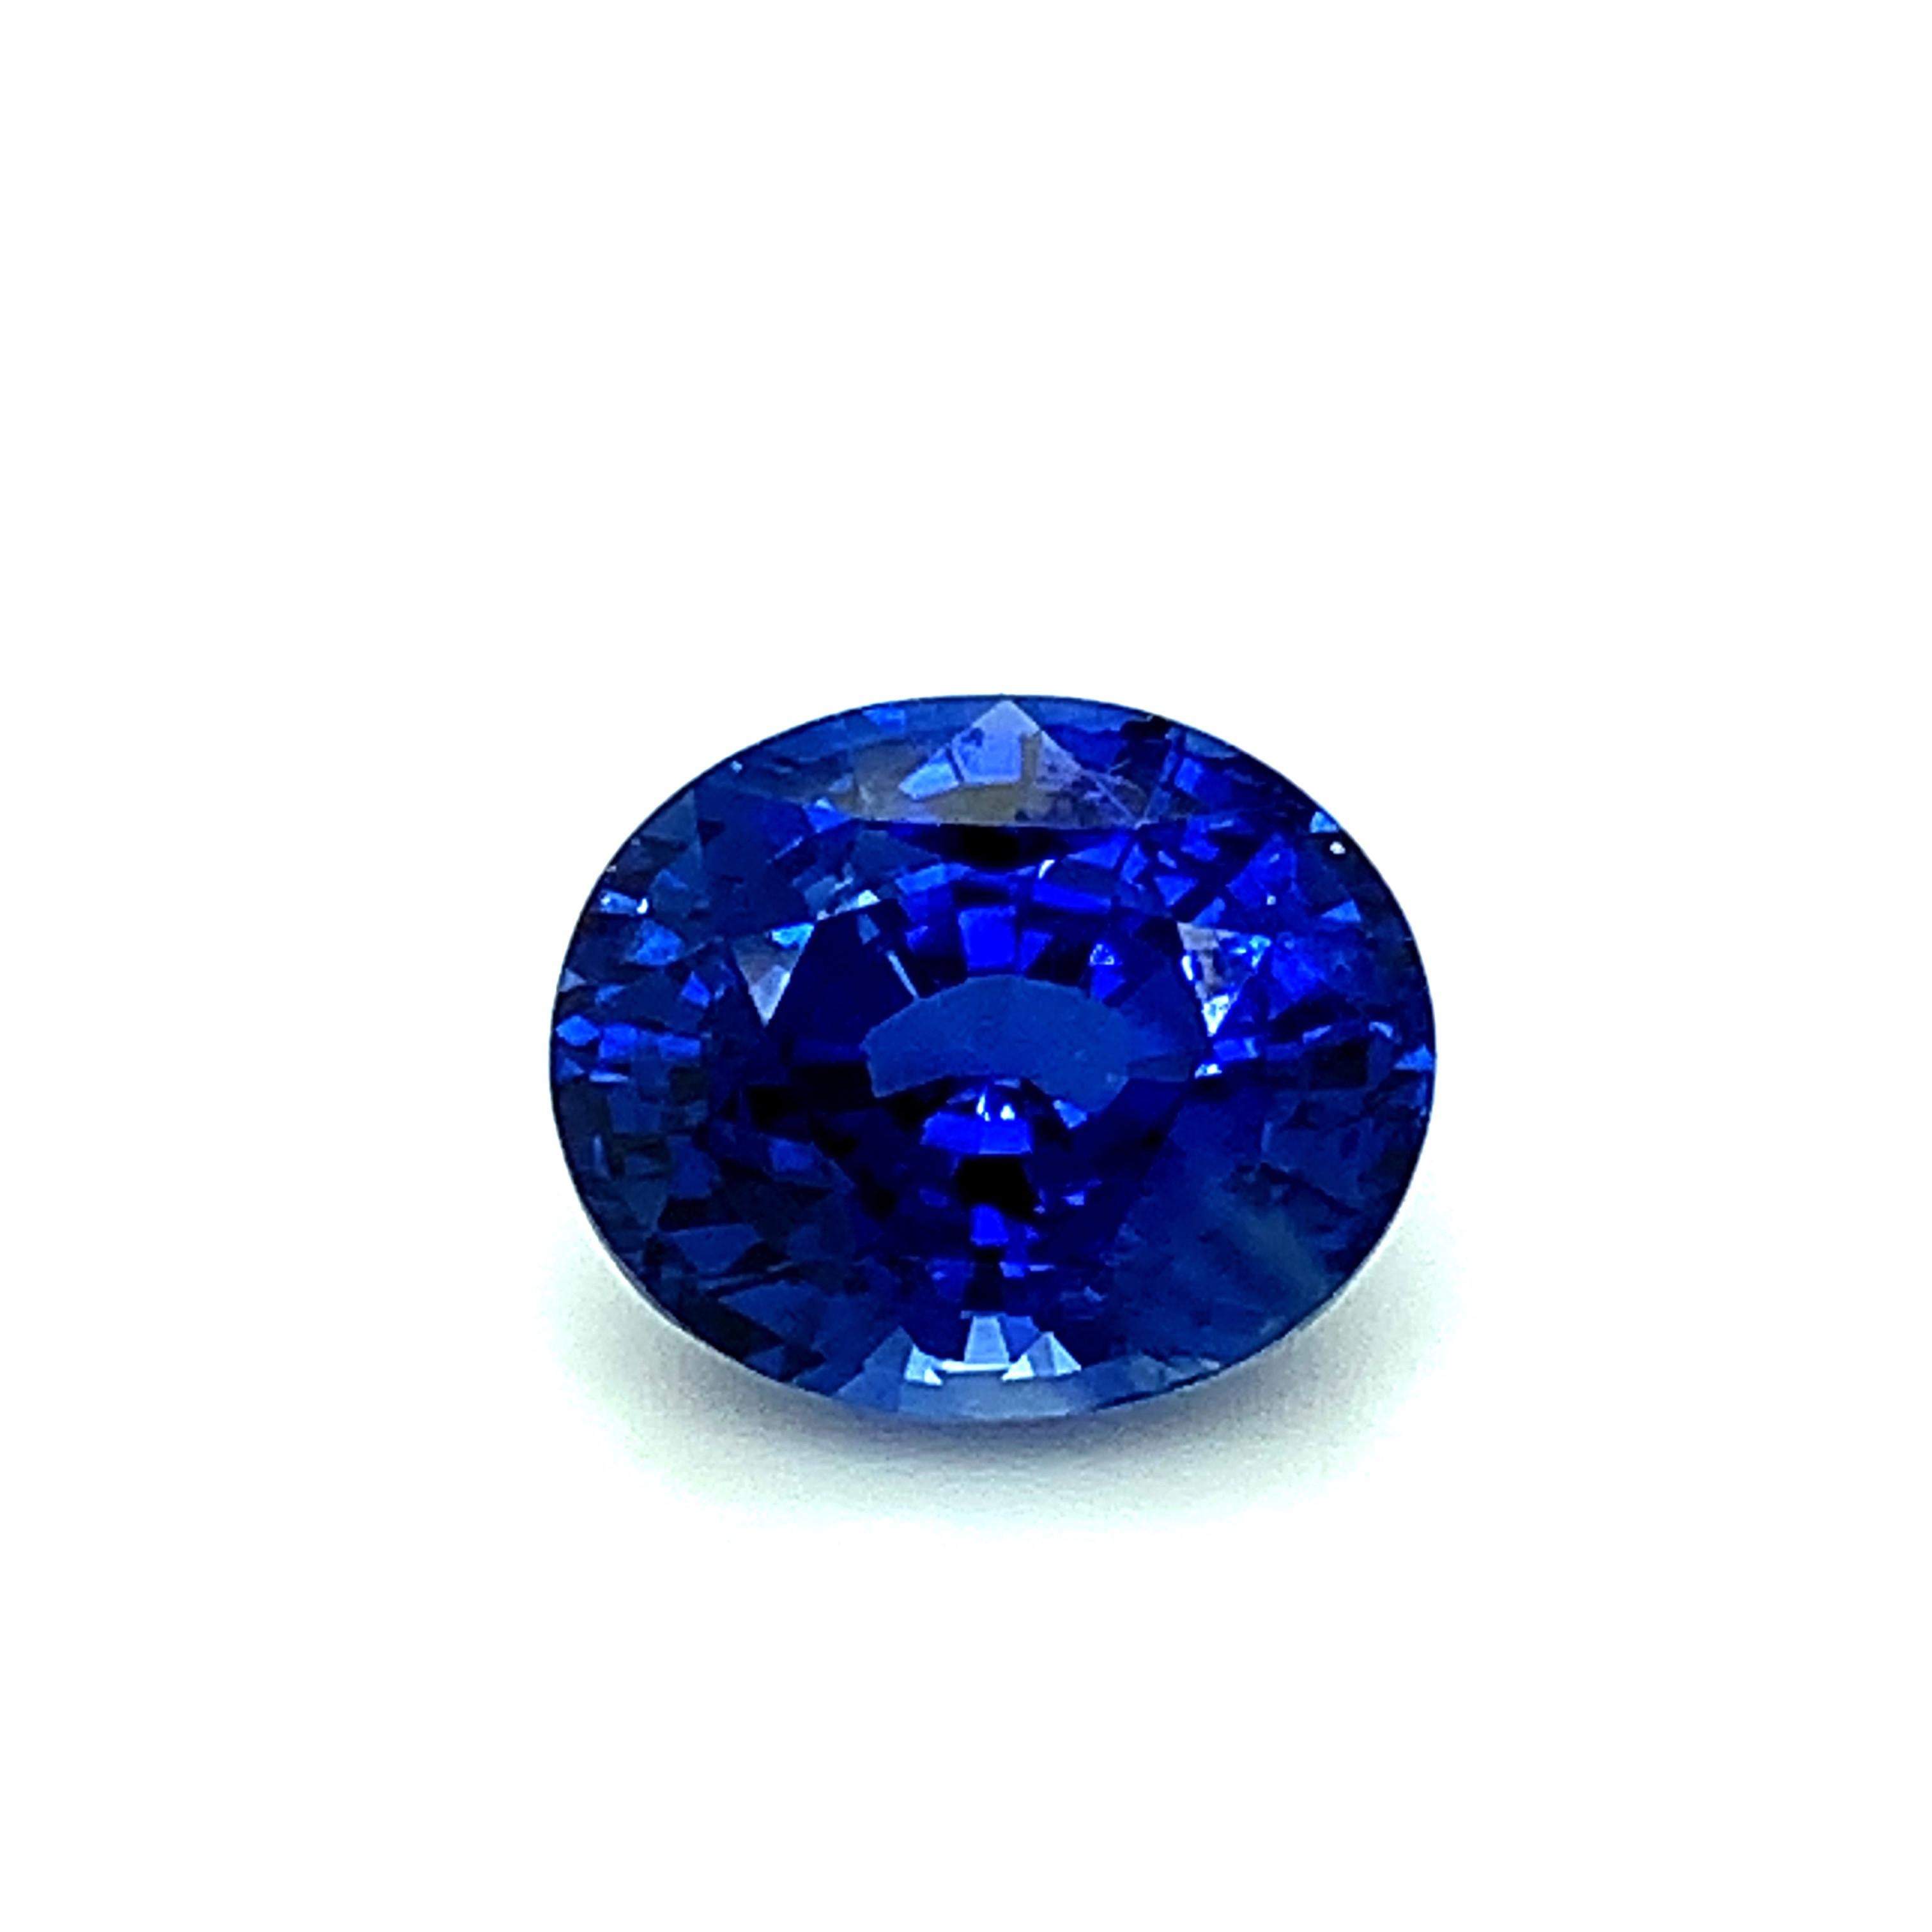 6.52 Carat Blue Sapphire Oval, Unset Loose Gemstone, GIA Certified  12